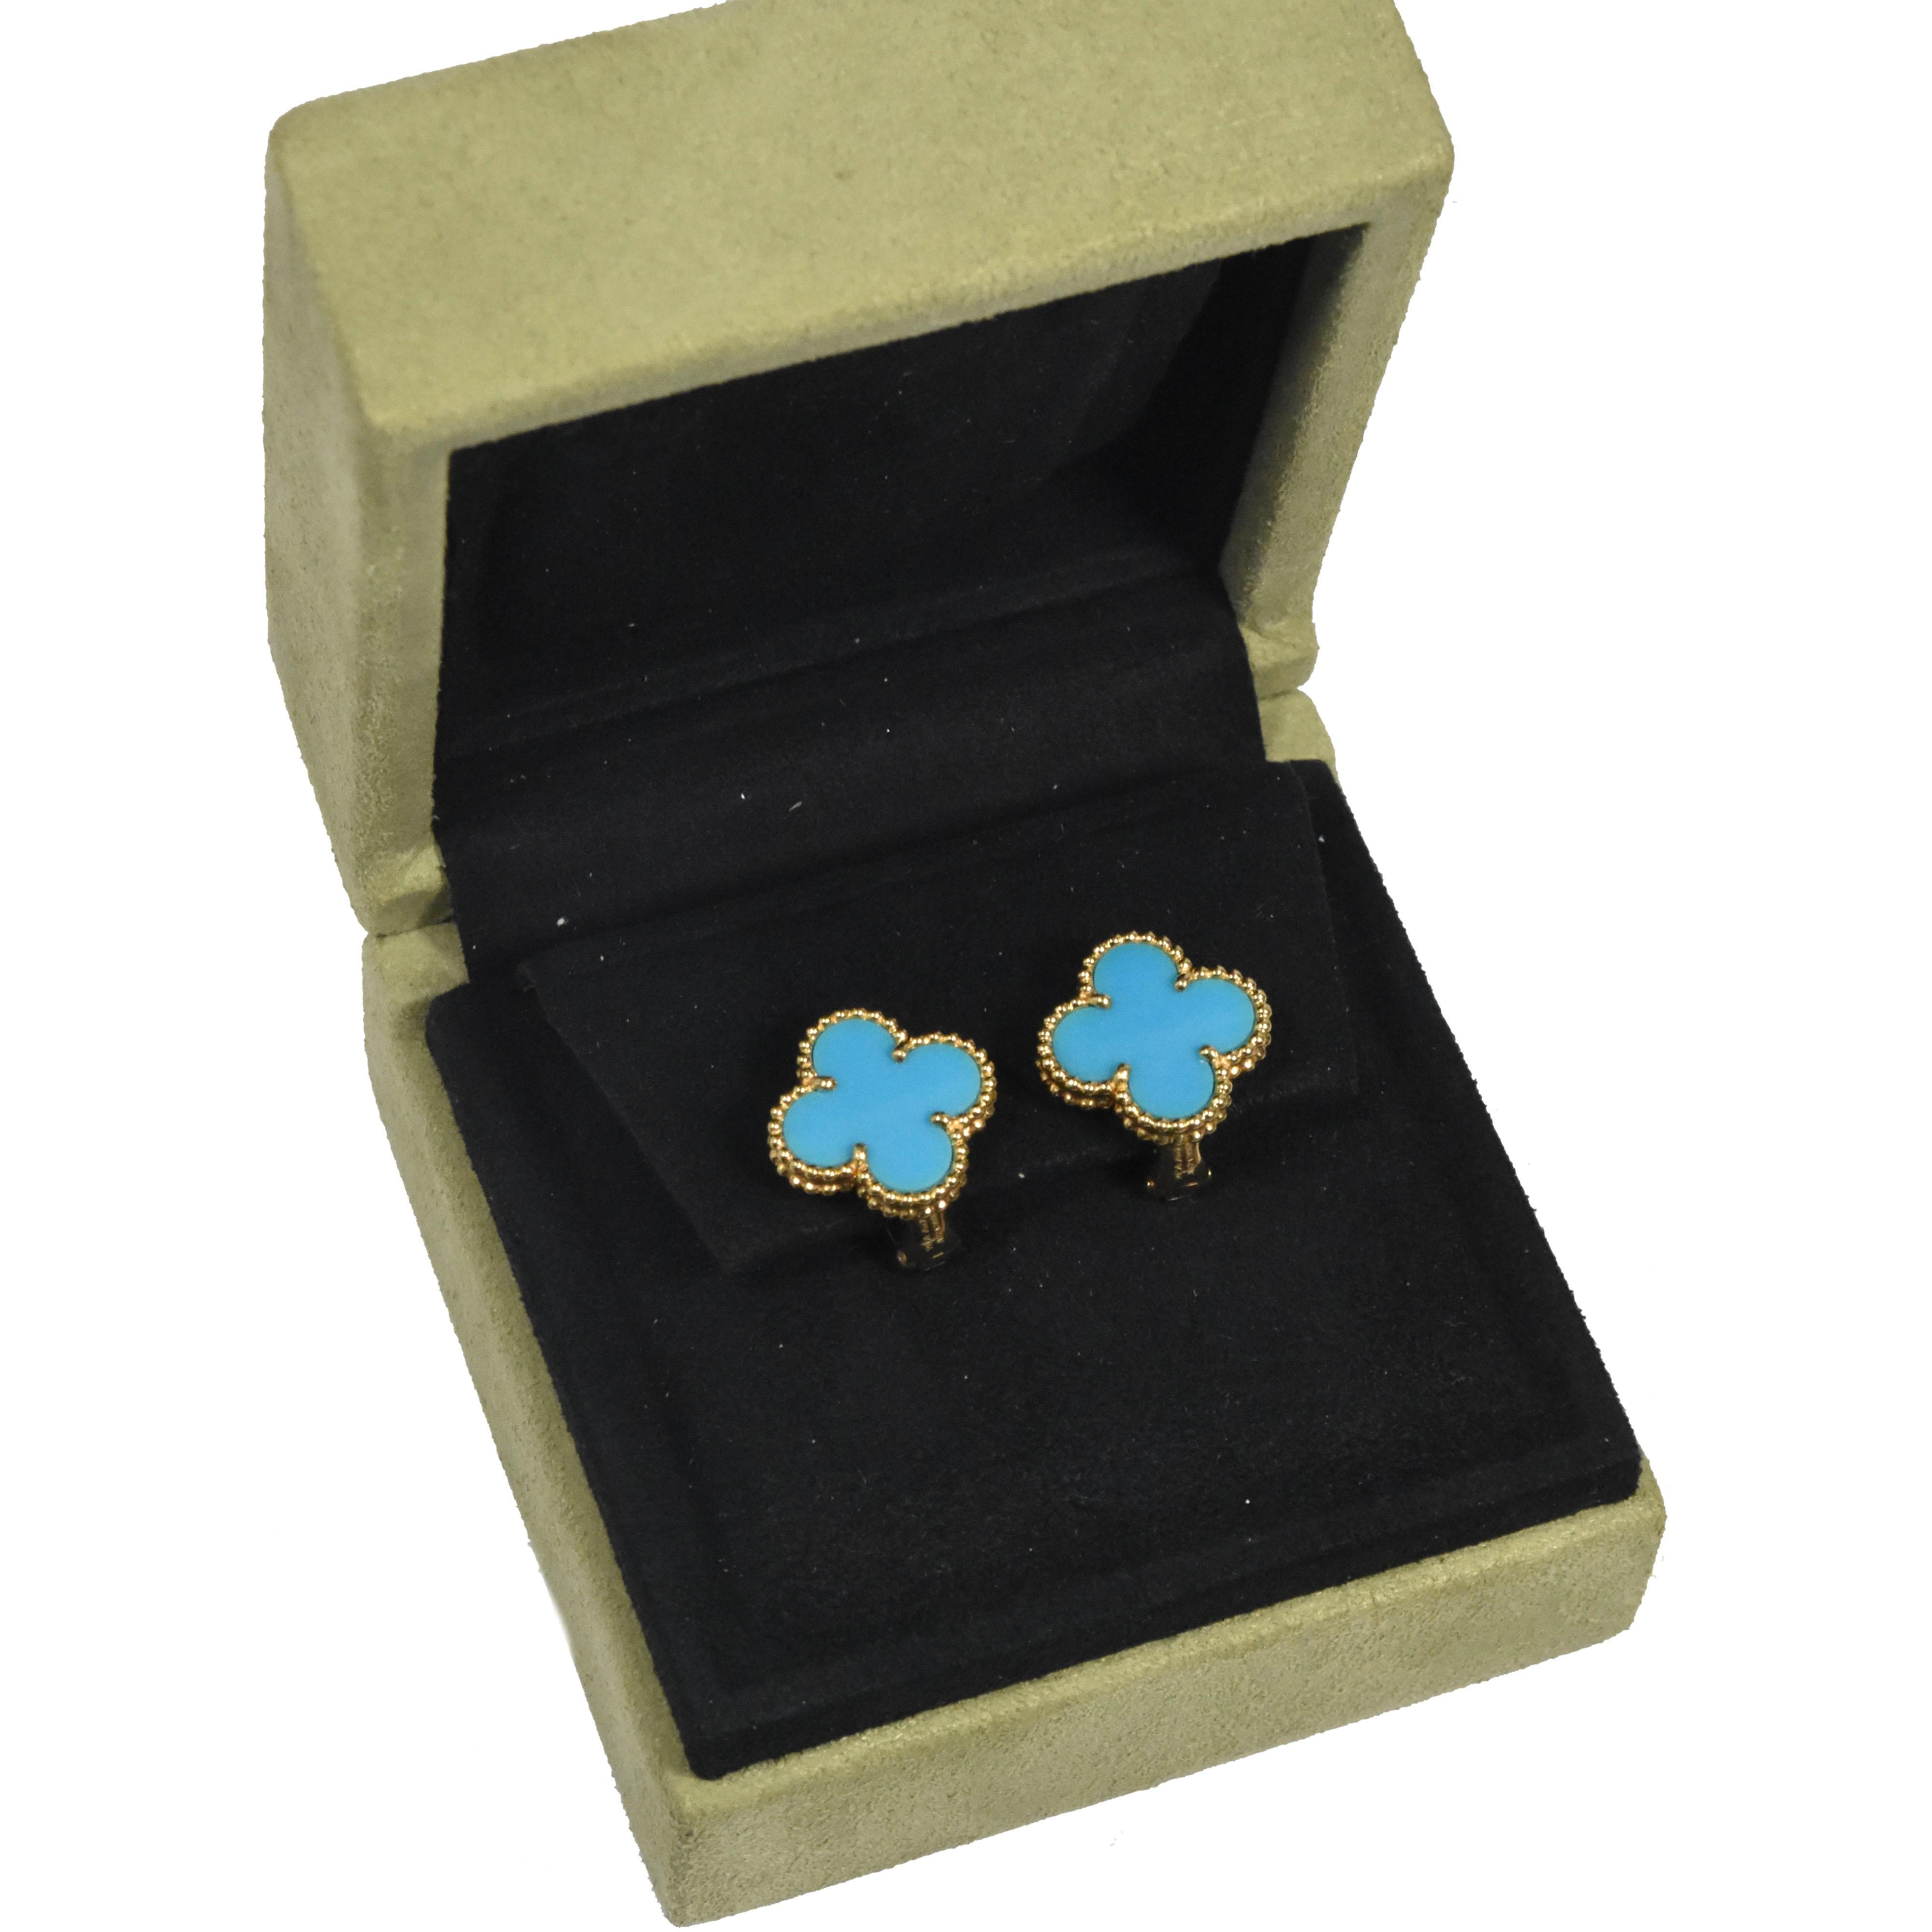 Designer: Van Cleef & Arpels

Collection: Vintage Alhambra

Style: 1 Motif Studs

Stones: Turquoise

Metal Type: Yellow Gold

Metal Purity: 18k

Total Item Weight (grams): 8.0

Earring Dimensions: 12.87 mm x 14.82 mm

Closure: Omega Post Backs